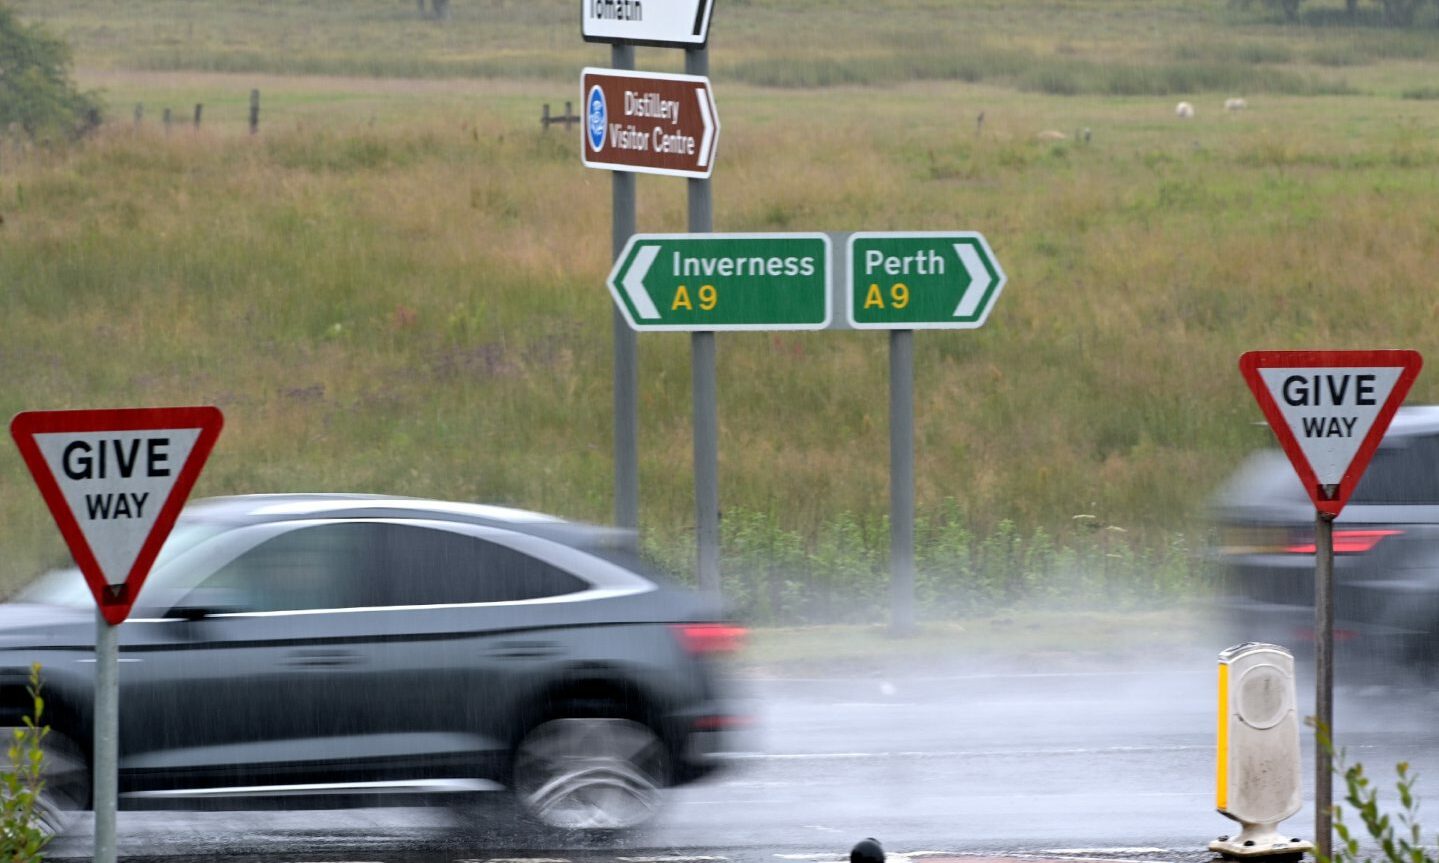 A9 signs pointing towards Inverness and Perth.